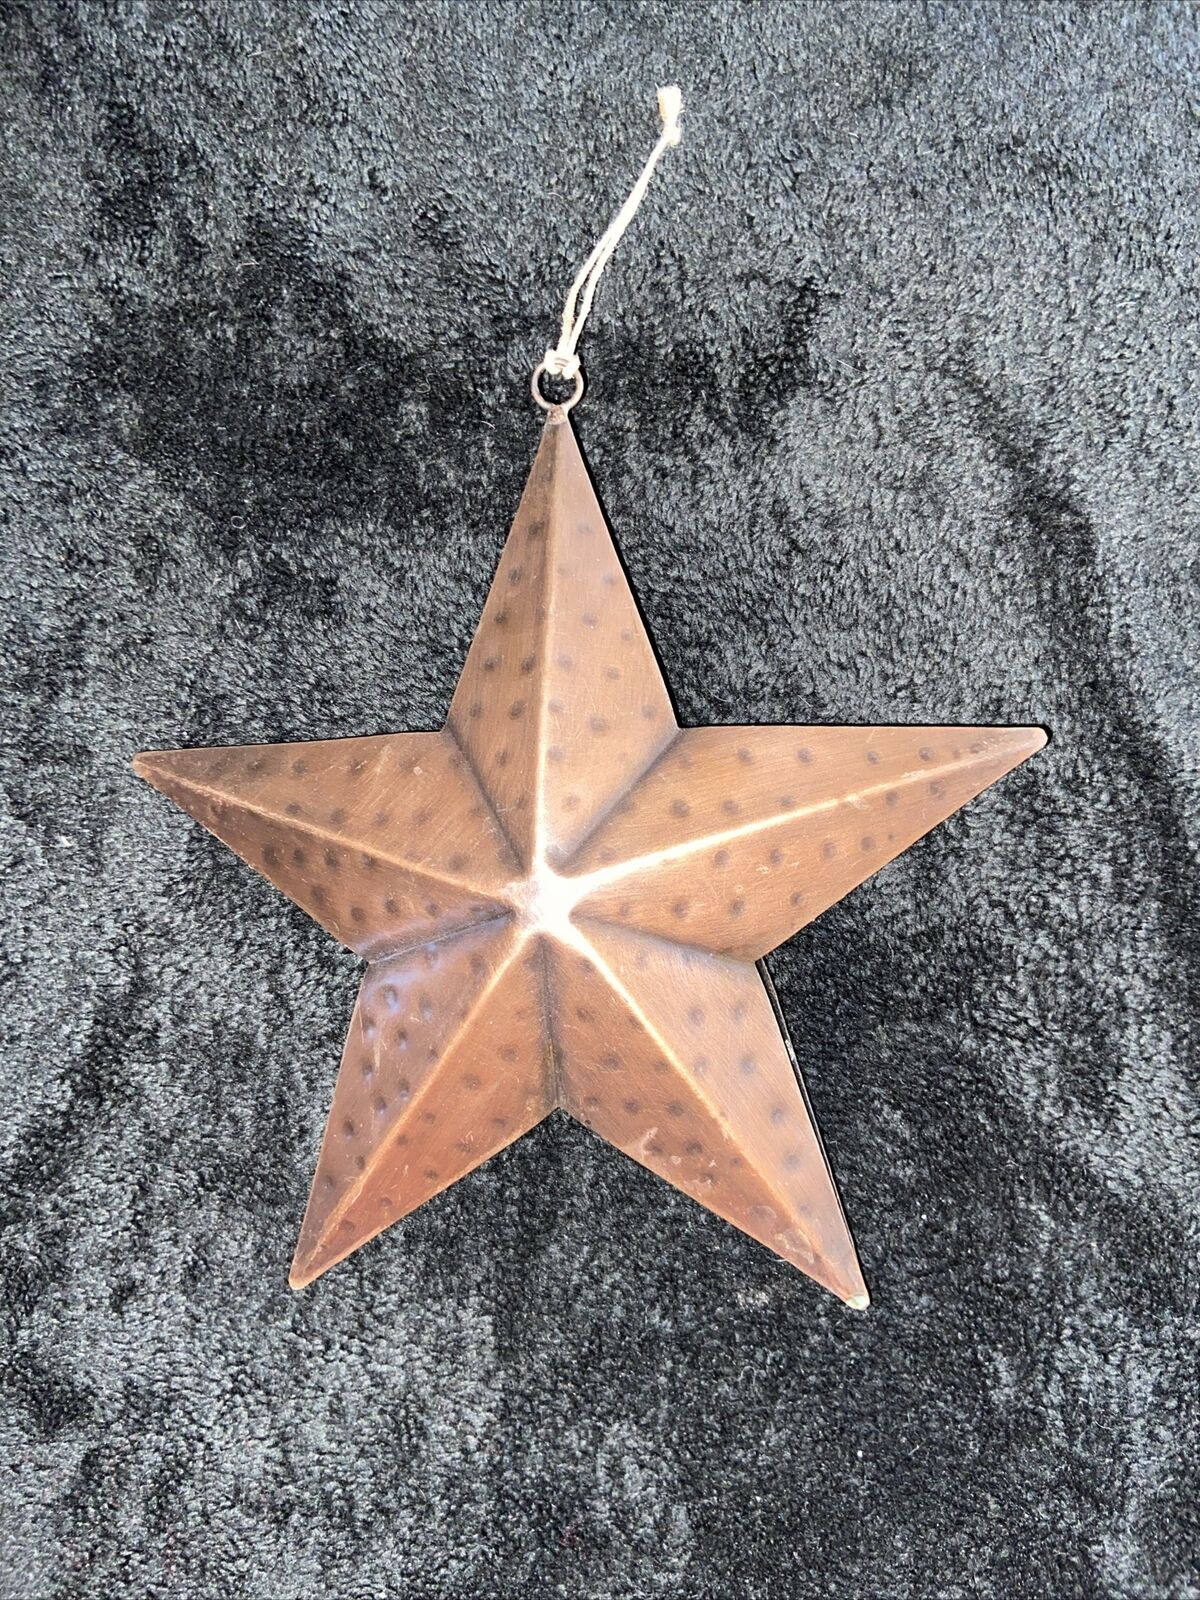 Christmas ￼Star Textured ￼ Rustic ￼Double Sided 5 Point ￼Decoration ￼Bronze